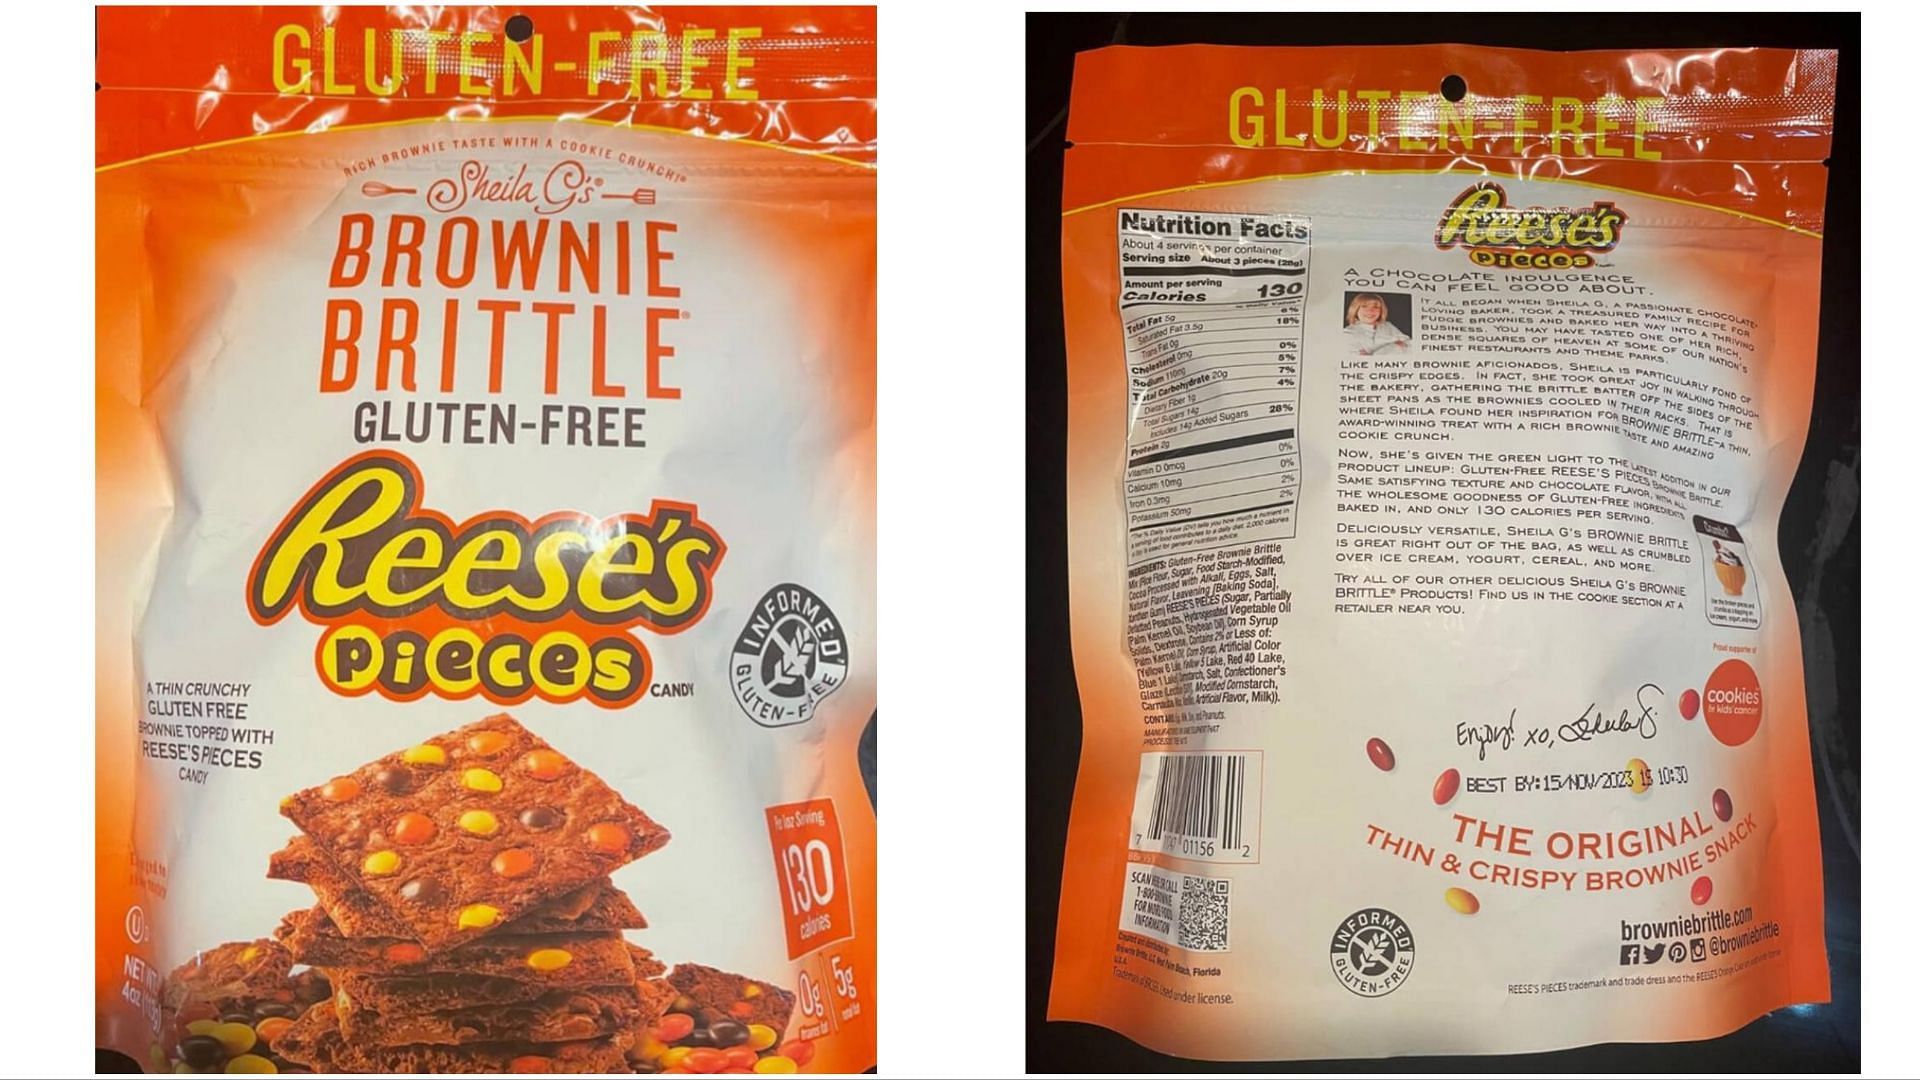 the recalled Gluten-Free Reese&rsquo;s Pieces Brownie Brittle was sold through major retailers across the United States (Image via FDA/Second Nature Brands)